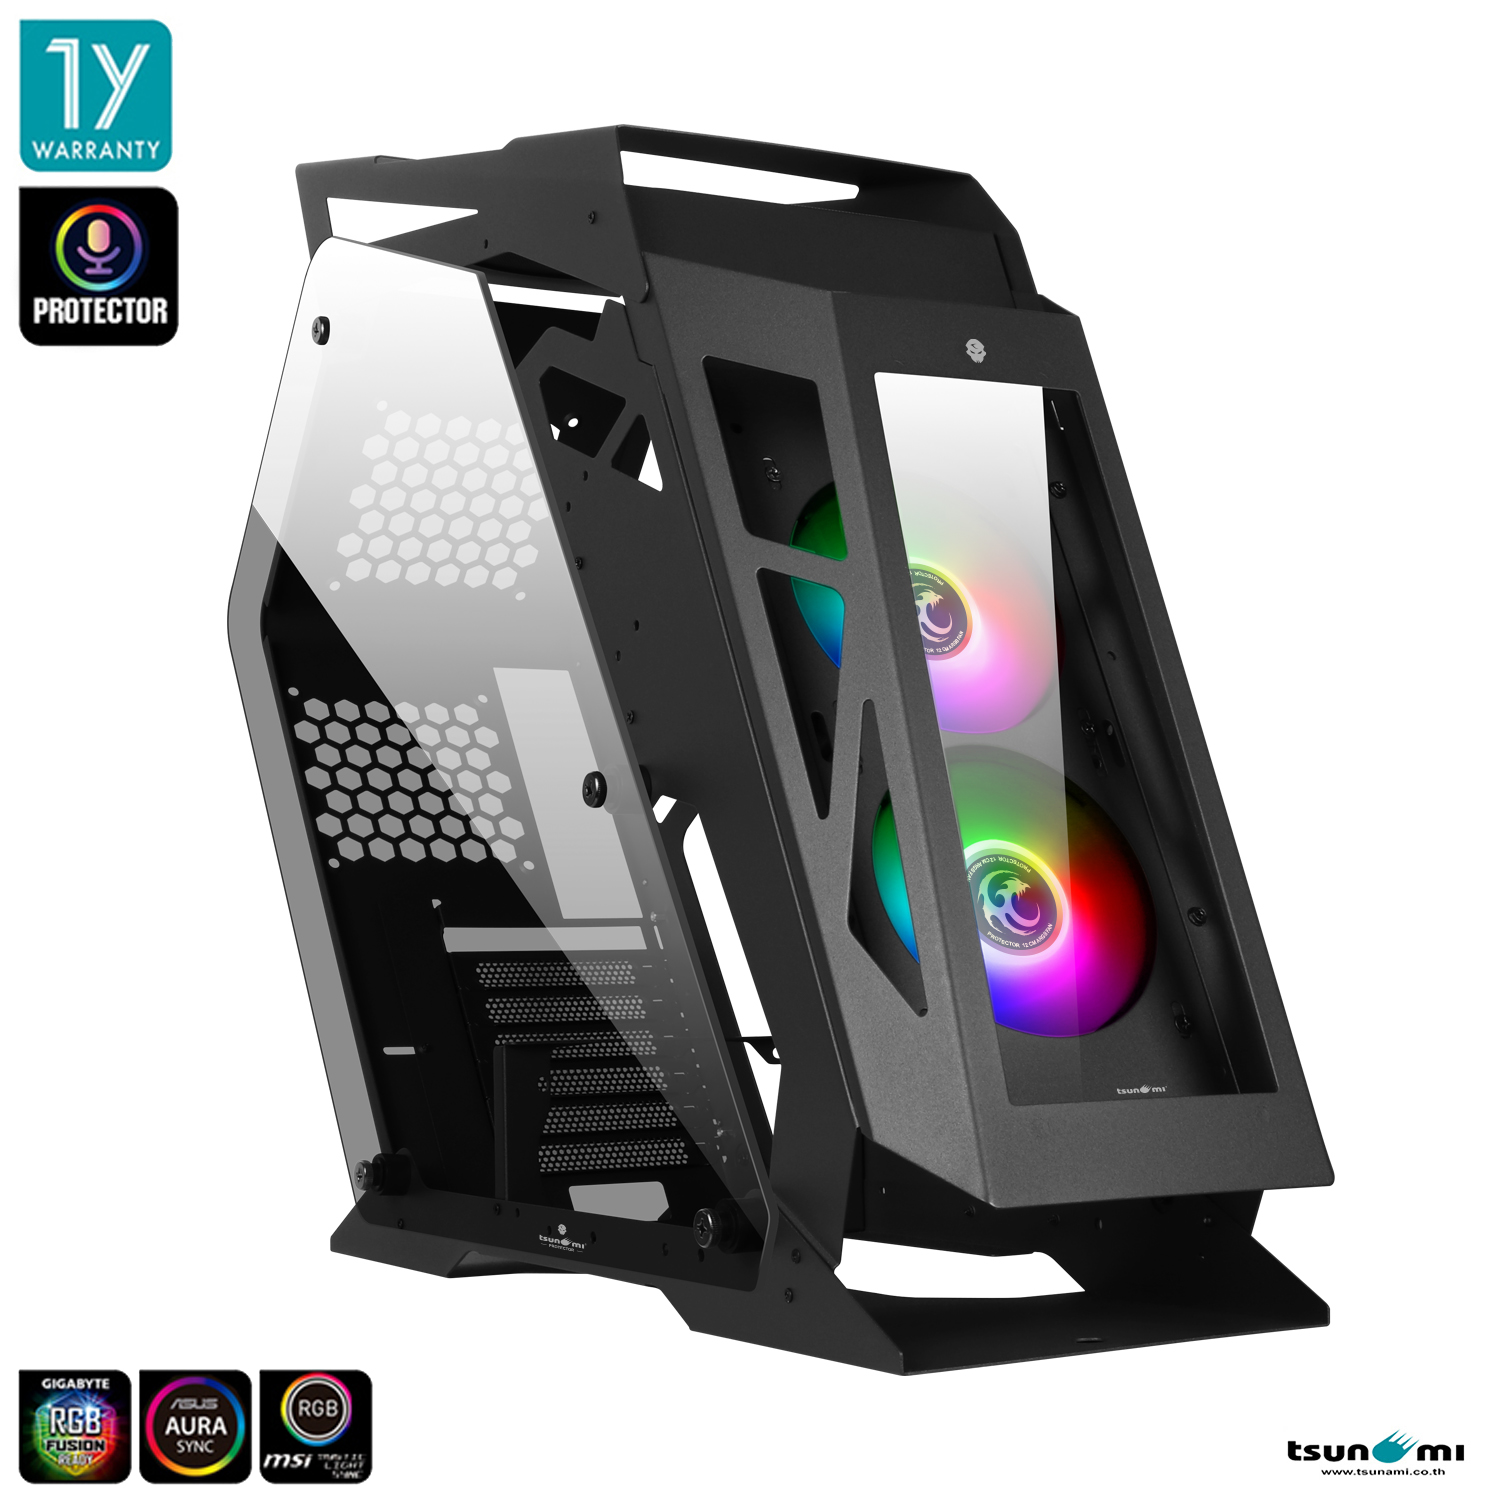 Tsunami Protector Goliath (Protector Sound Sync) Tempered Glass ATX Mutant Gaming Computer Case with Ablaze+ (Aura）*2